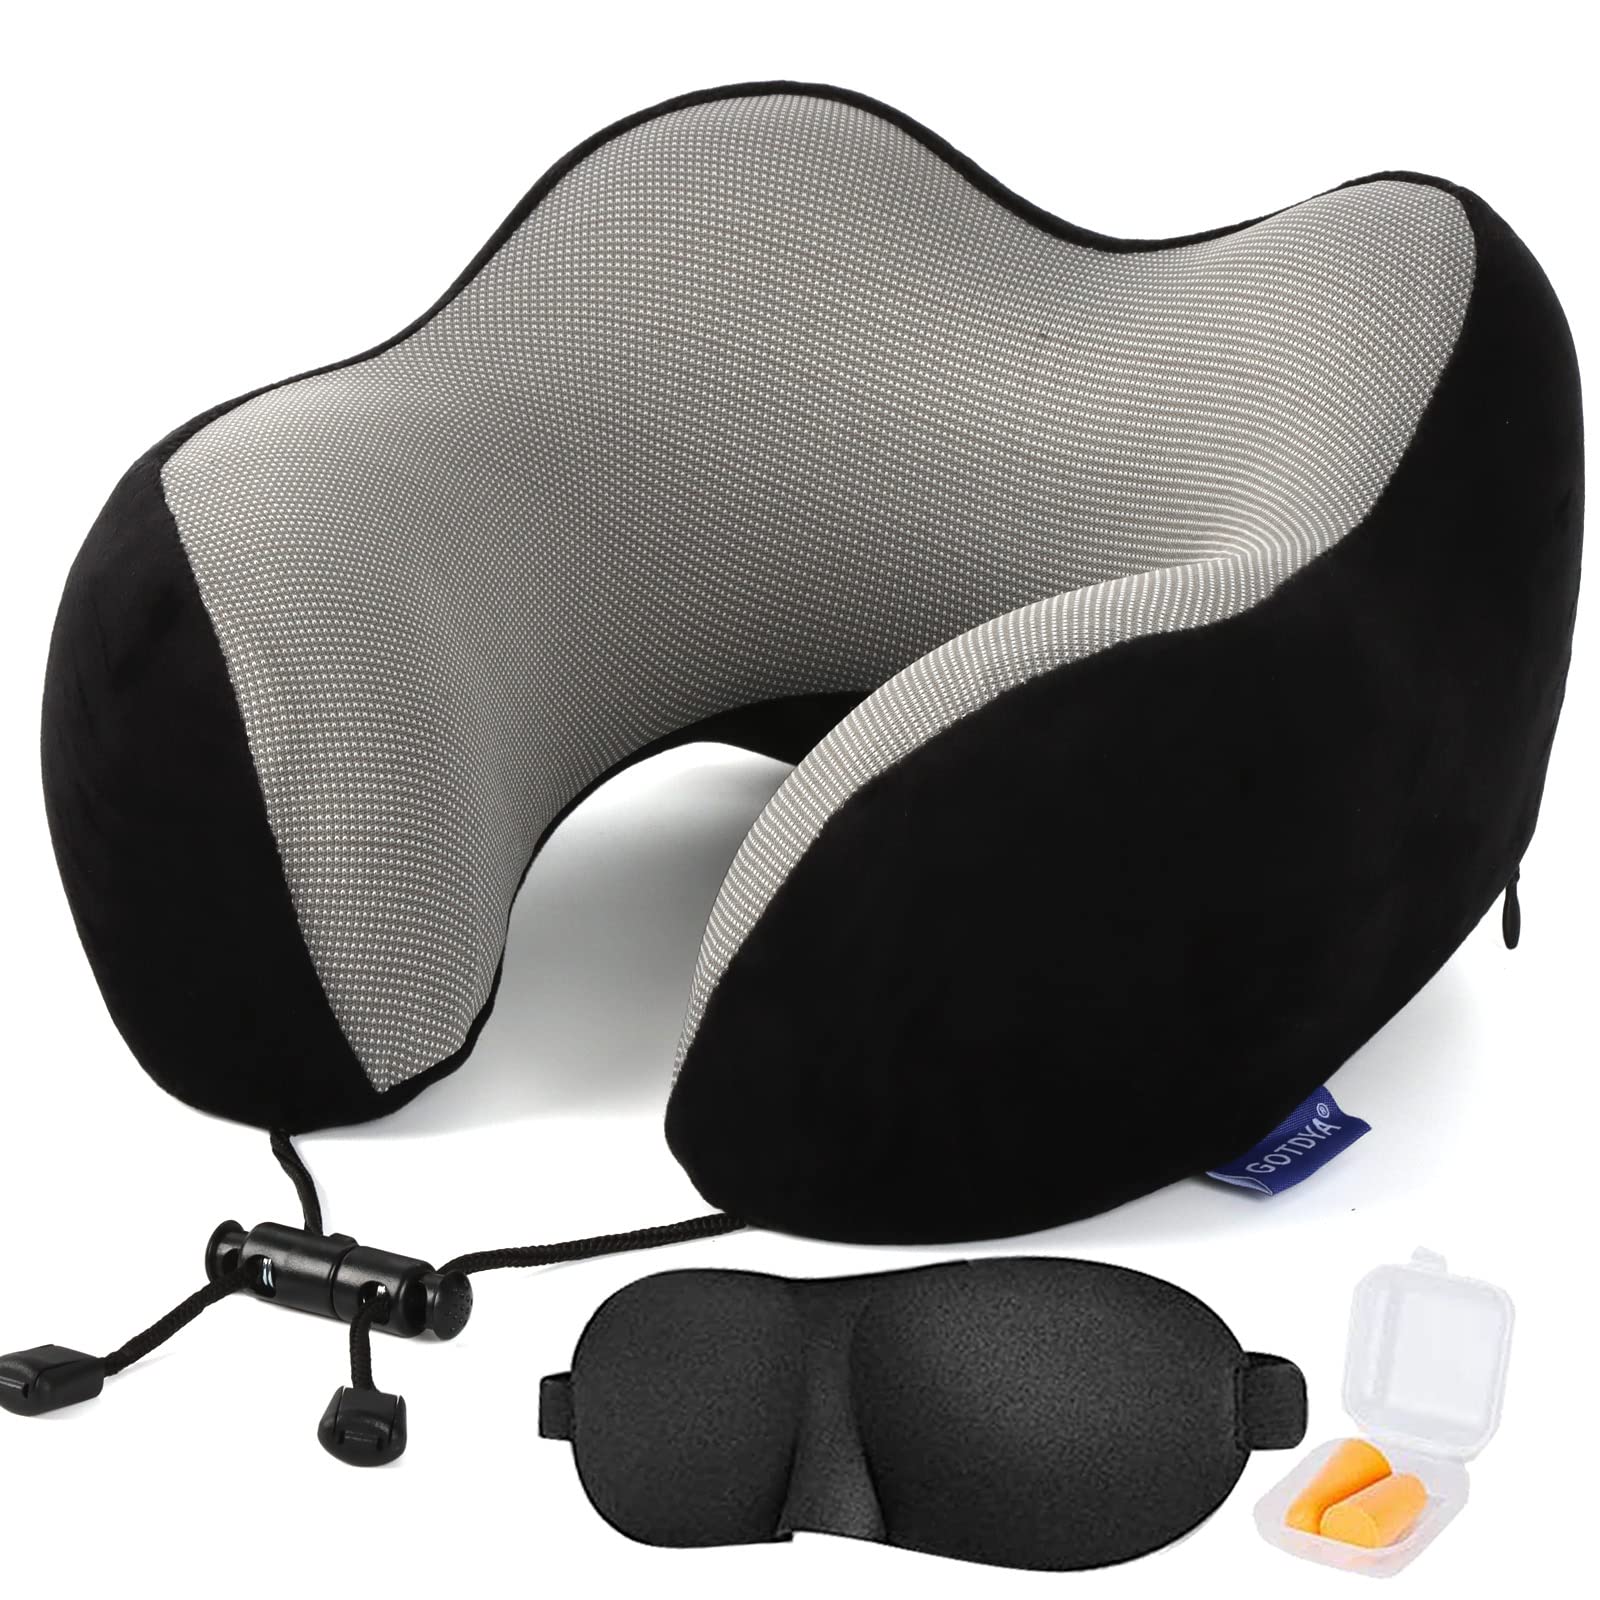 GOTDYA Travel Pillow,Travel Neck Pillows for Sleeping,100% Pure Memory Foam Soft Comfort & Support Pillow for Airplane/Car/Office&Home Rest Use-Black